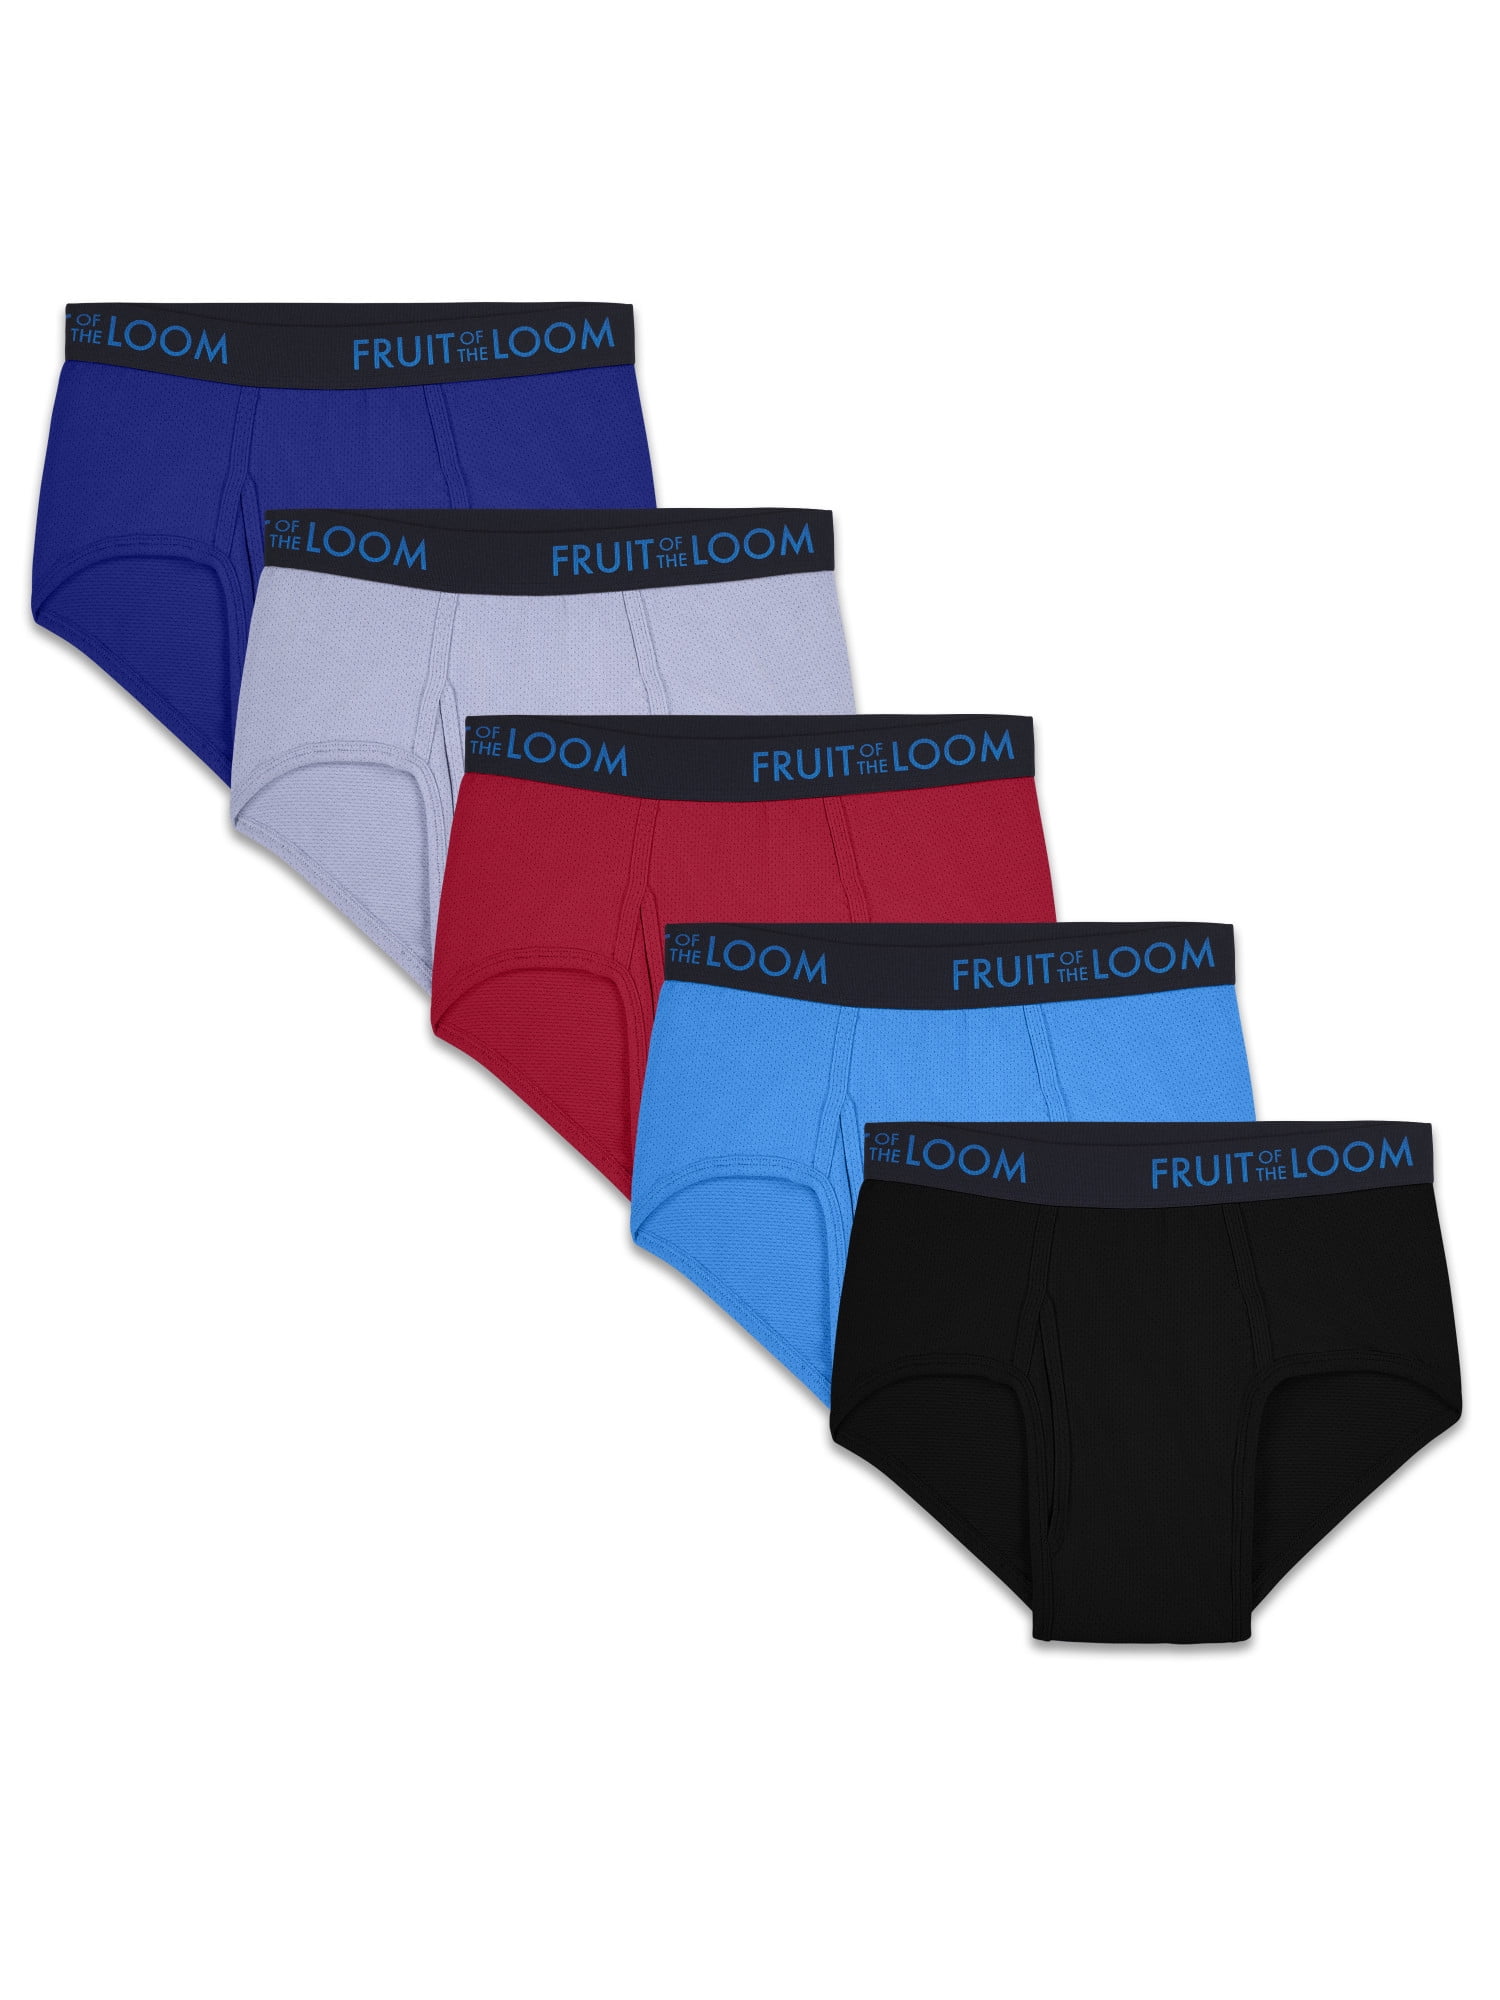 Fruit of the Loom Men's Breathable Cotton Micro-Mesh Briefs, 5 Pack